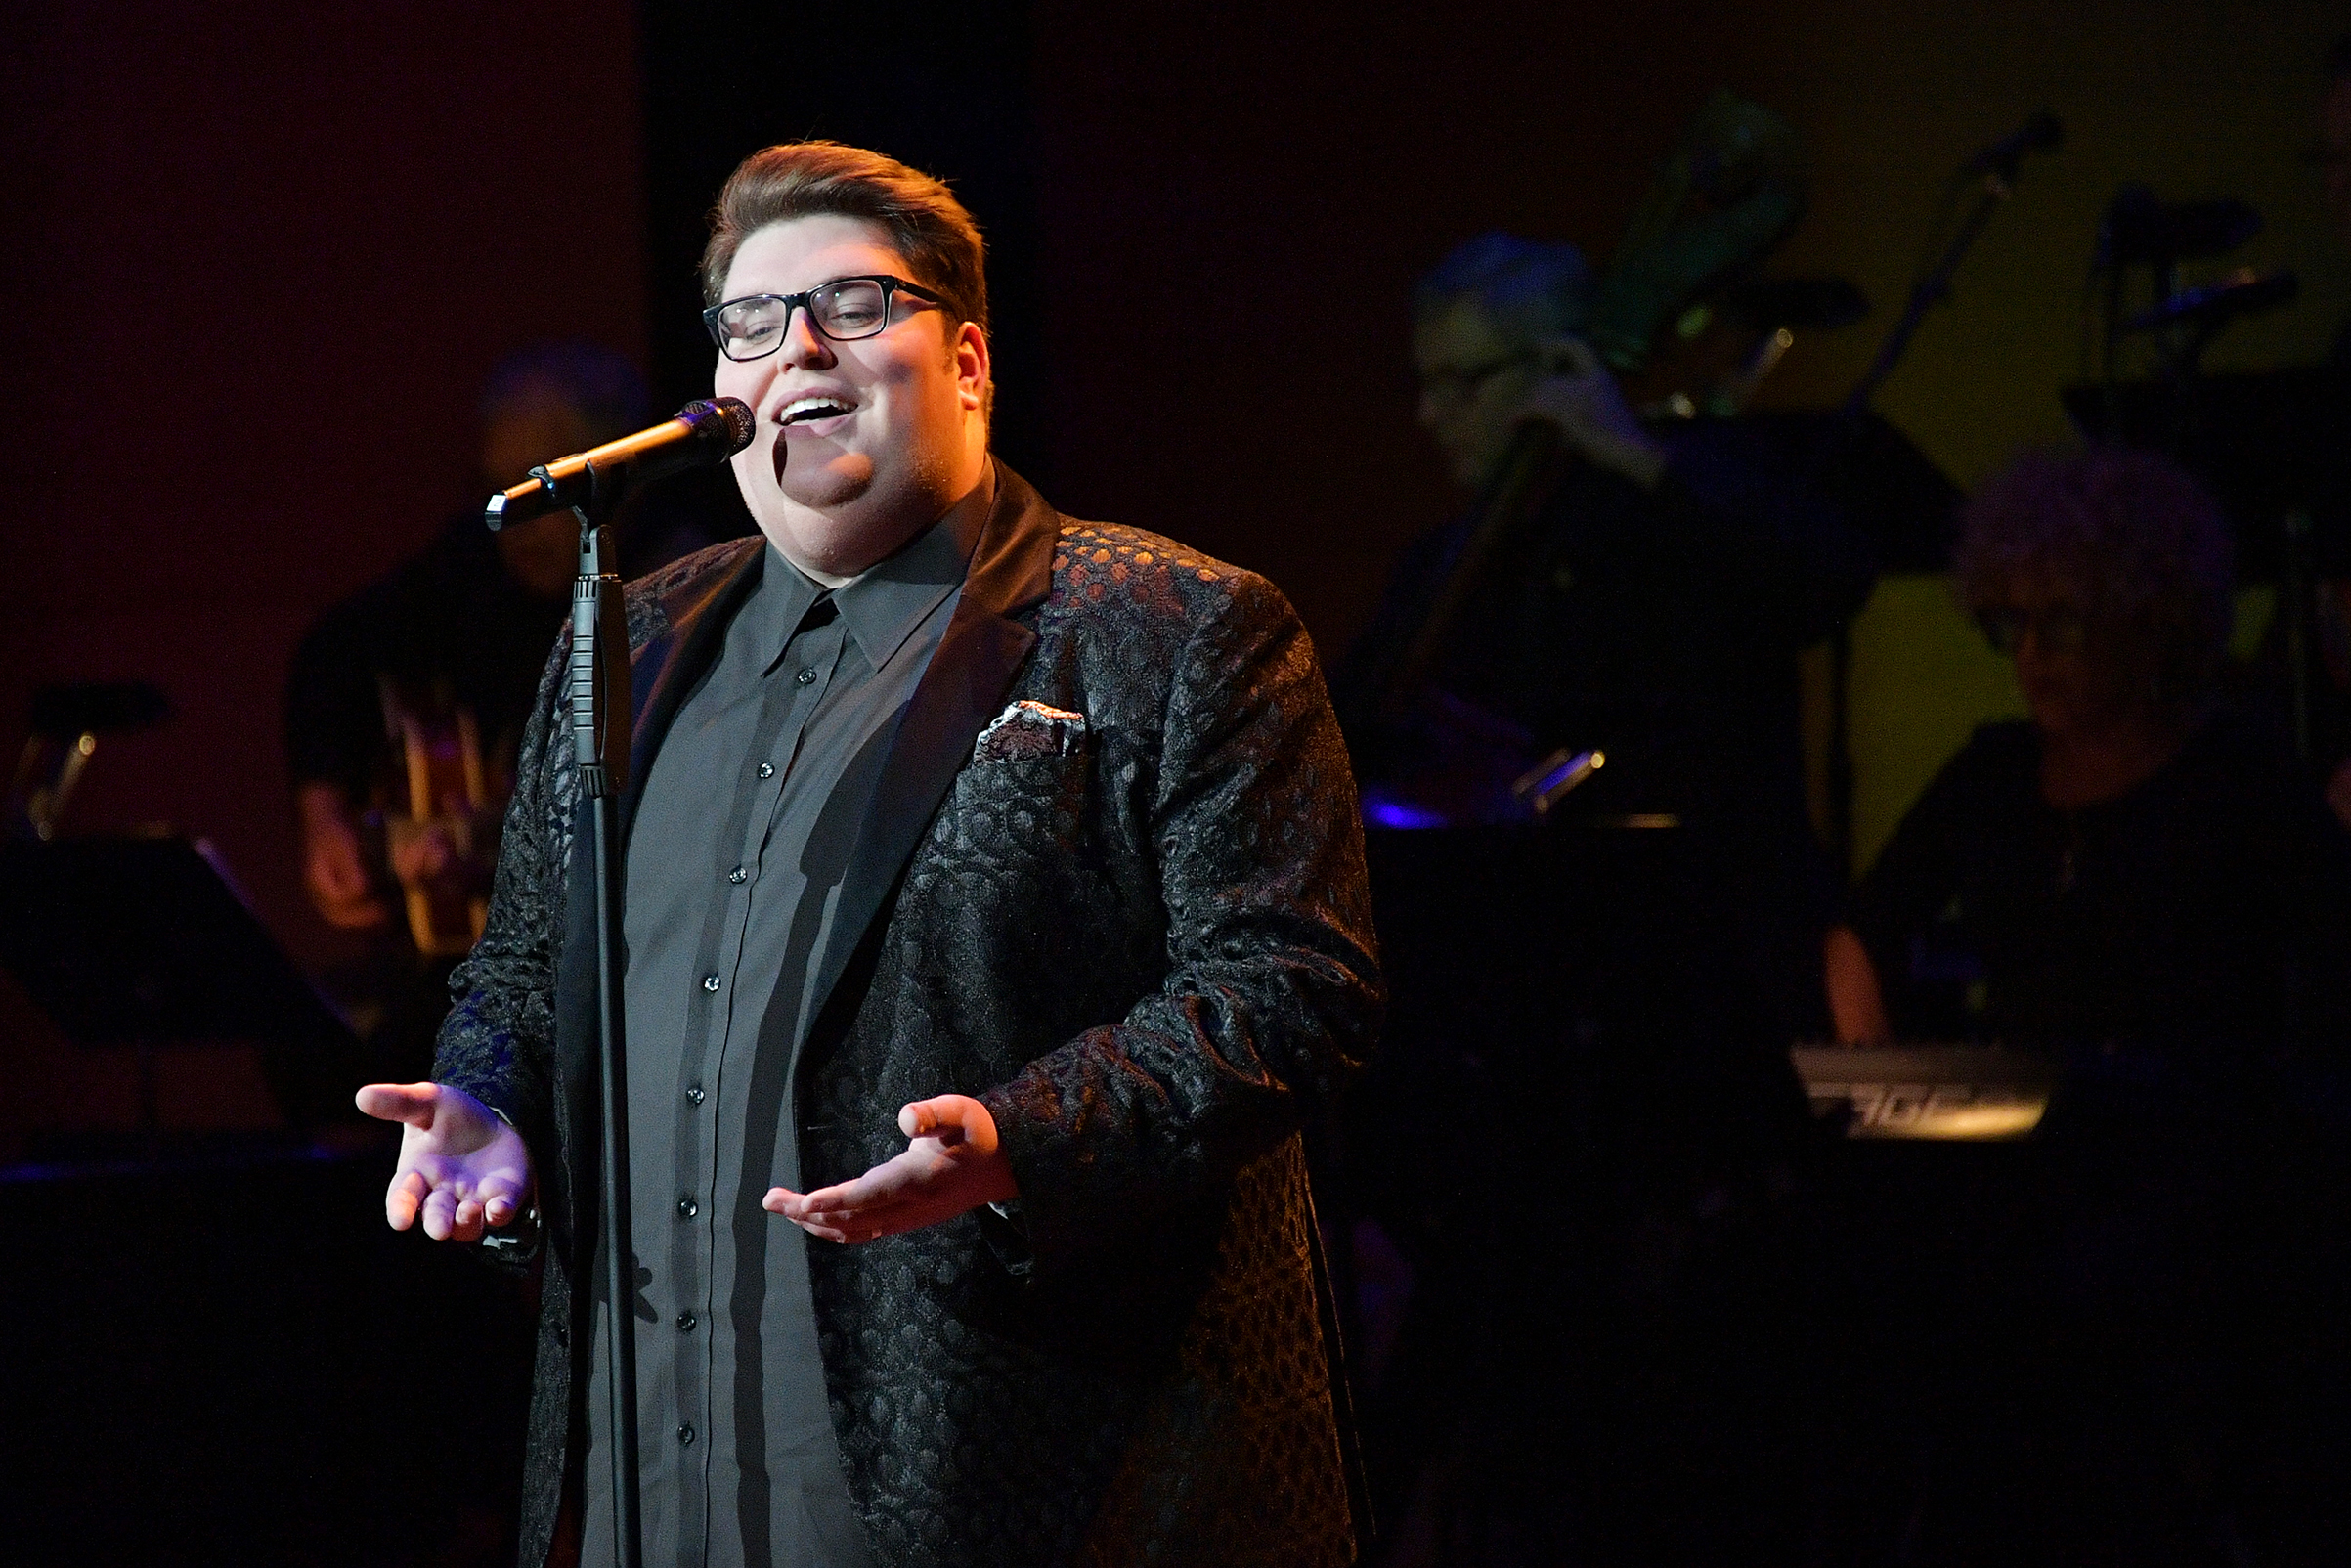 Singer Jordan Smith performs onstage during Lincoln Center's American Songbook Gala at Alice Tully Hall on May 29, 2018. (Dia Dipasupil—Lincoln Center/Getty Images)